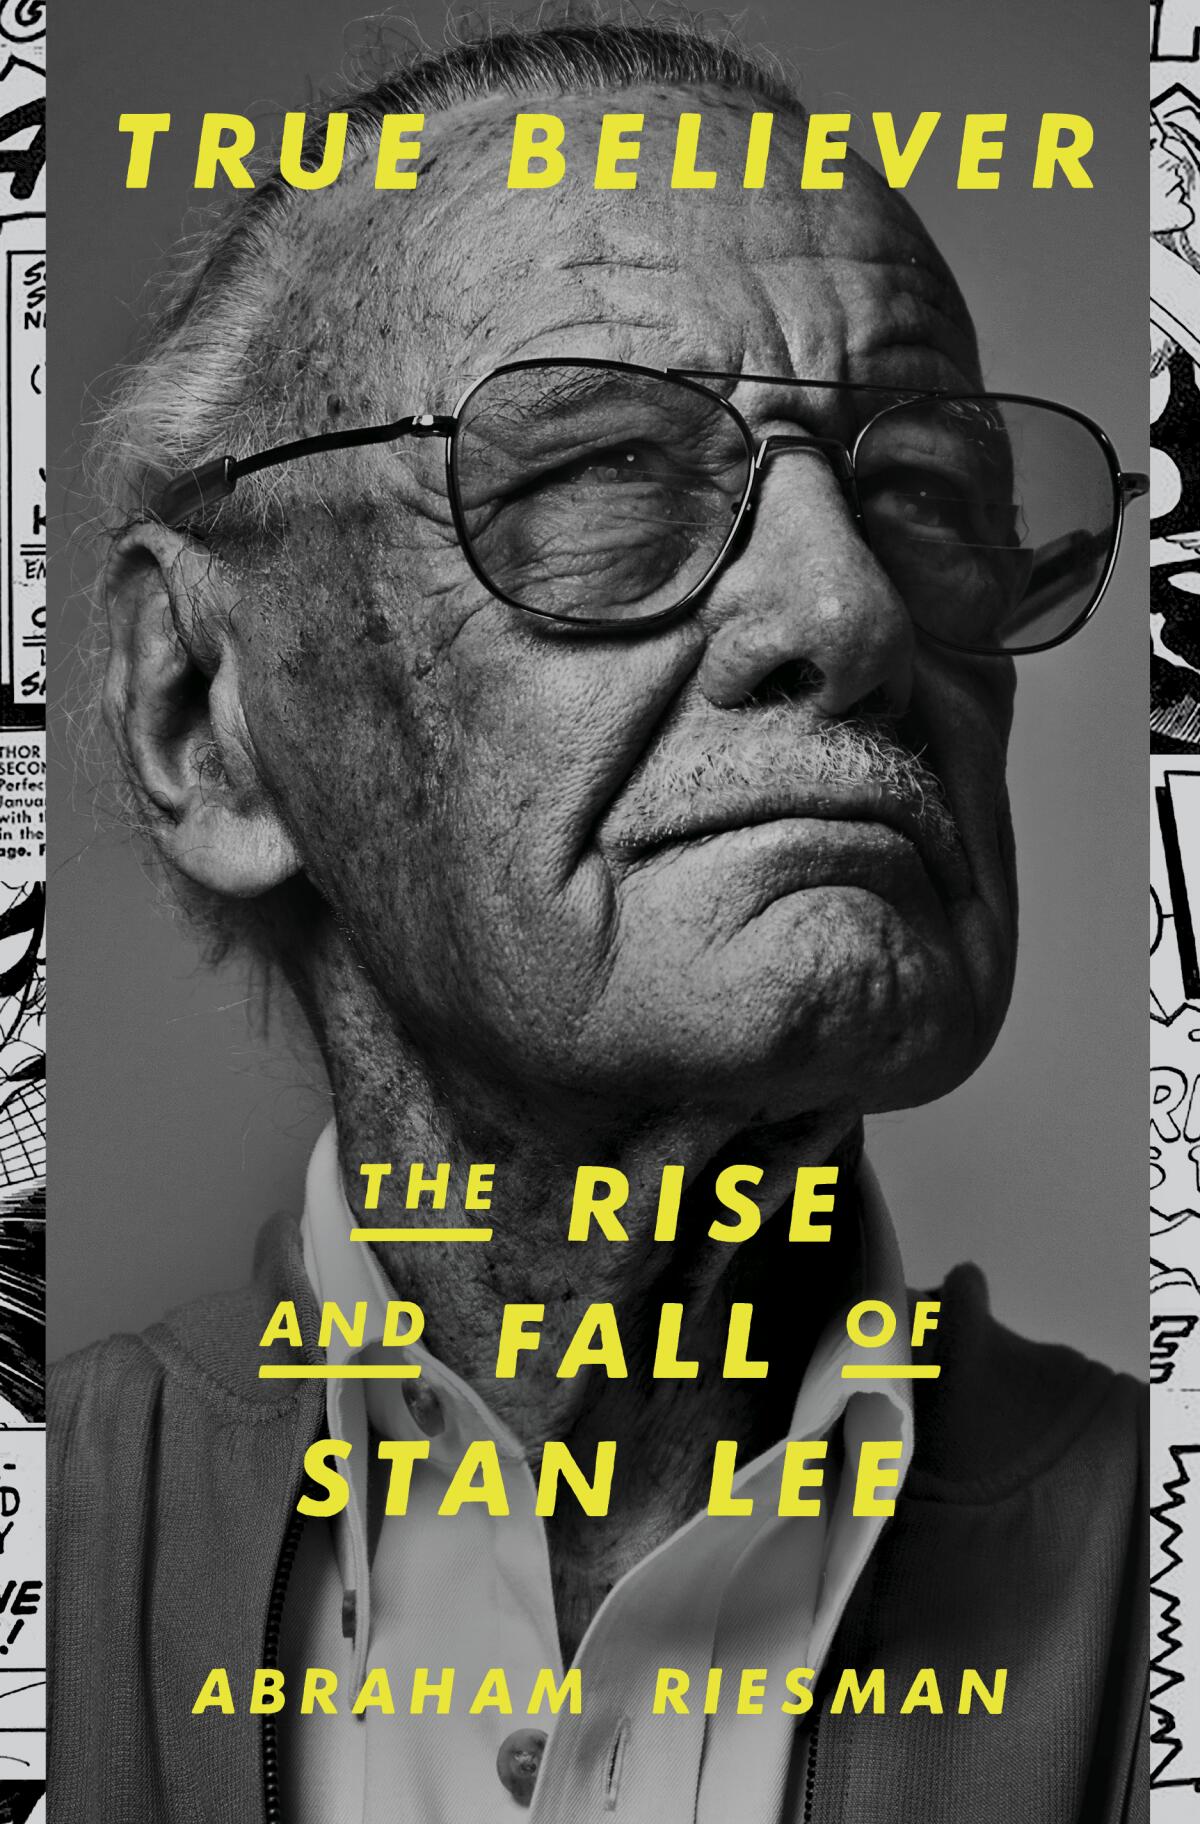 'True Believer: The Rise and Fall of Stan Lee,' by Abraham Riesman